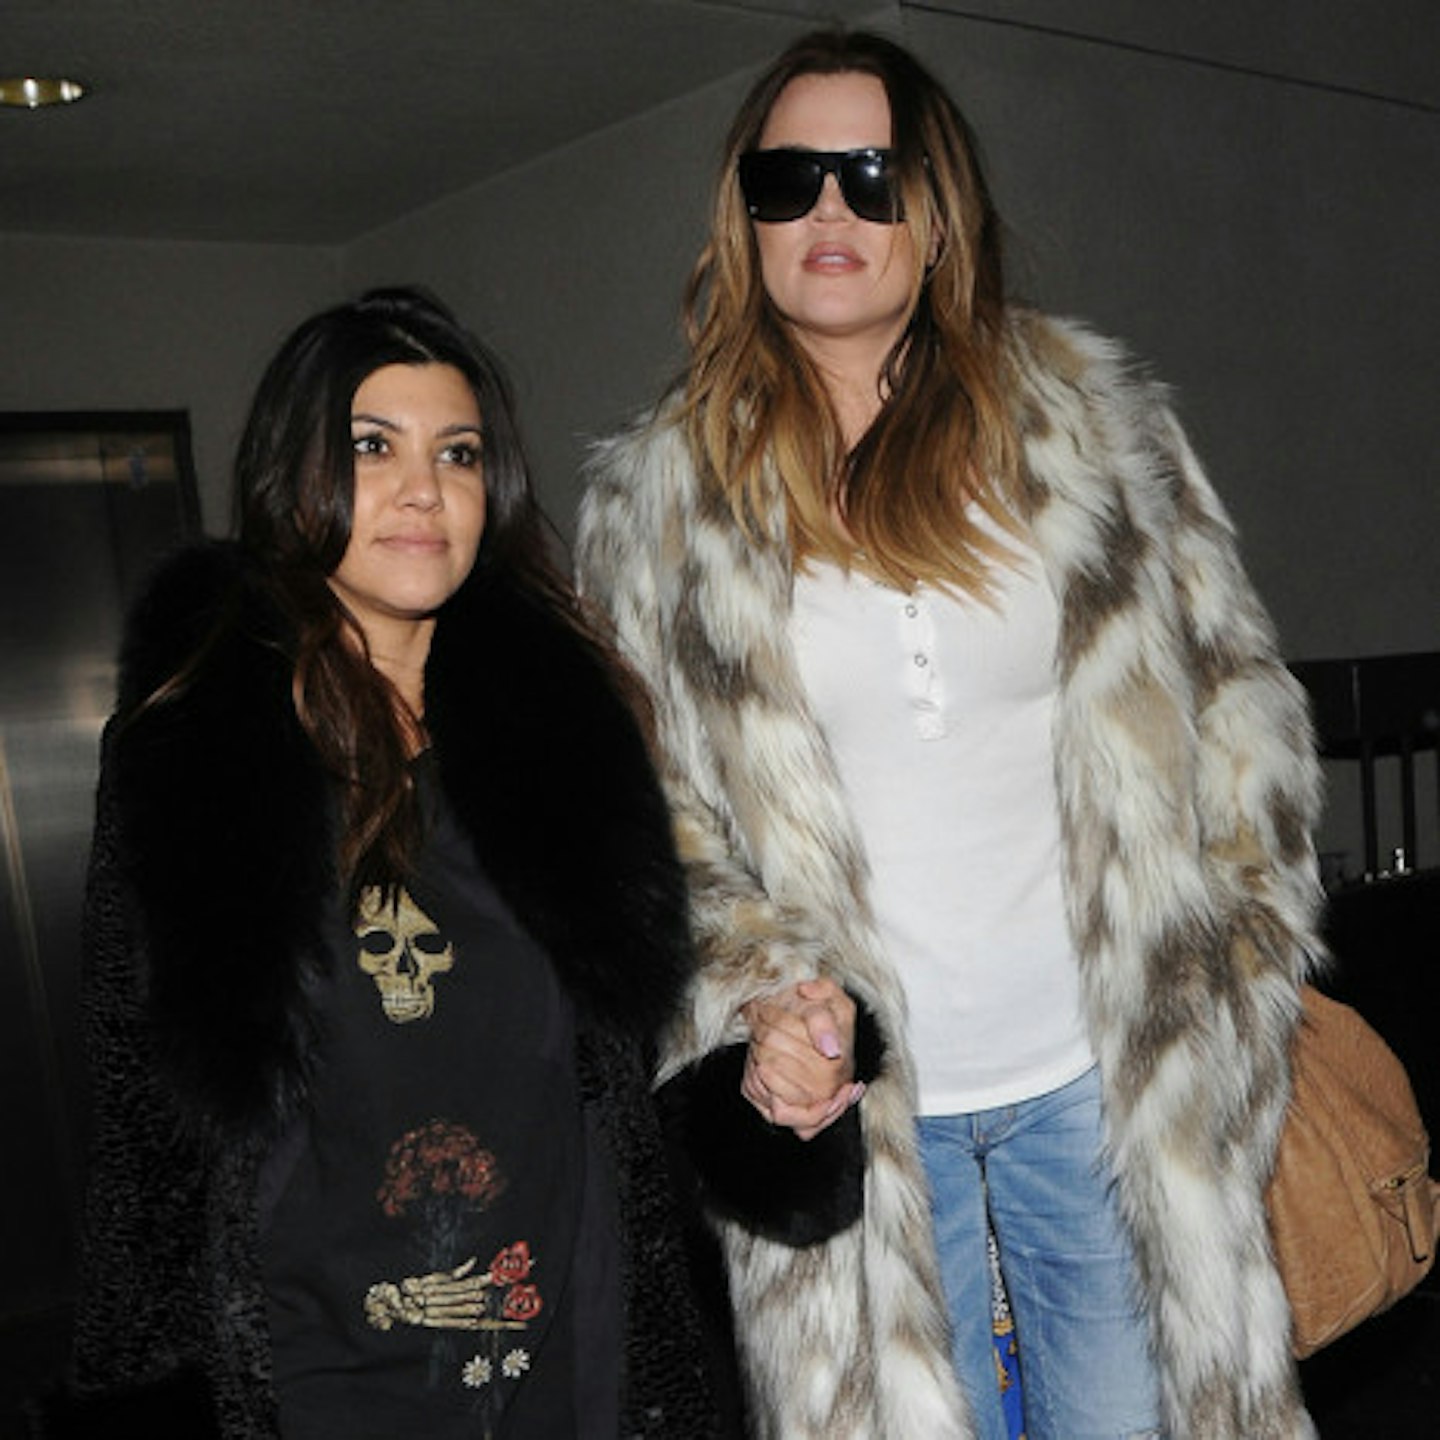 According to sources, residents of the Hamptons really don't want Khloe and Kourtney filming their new show there